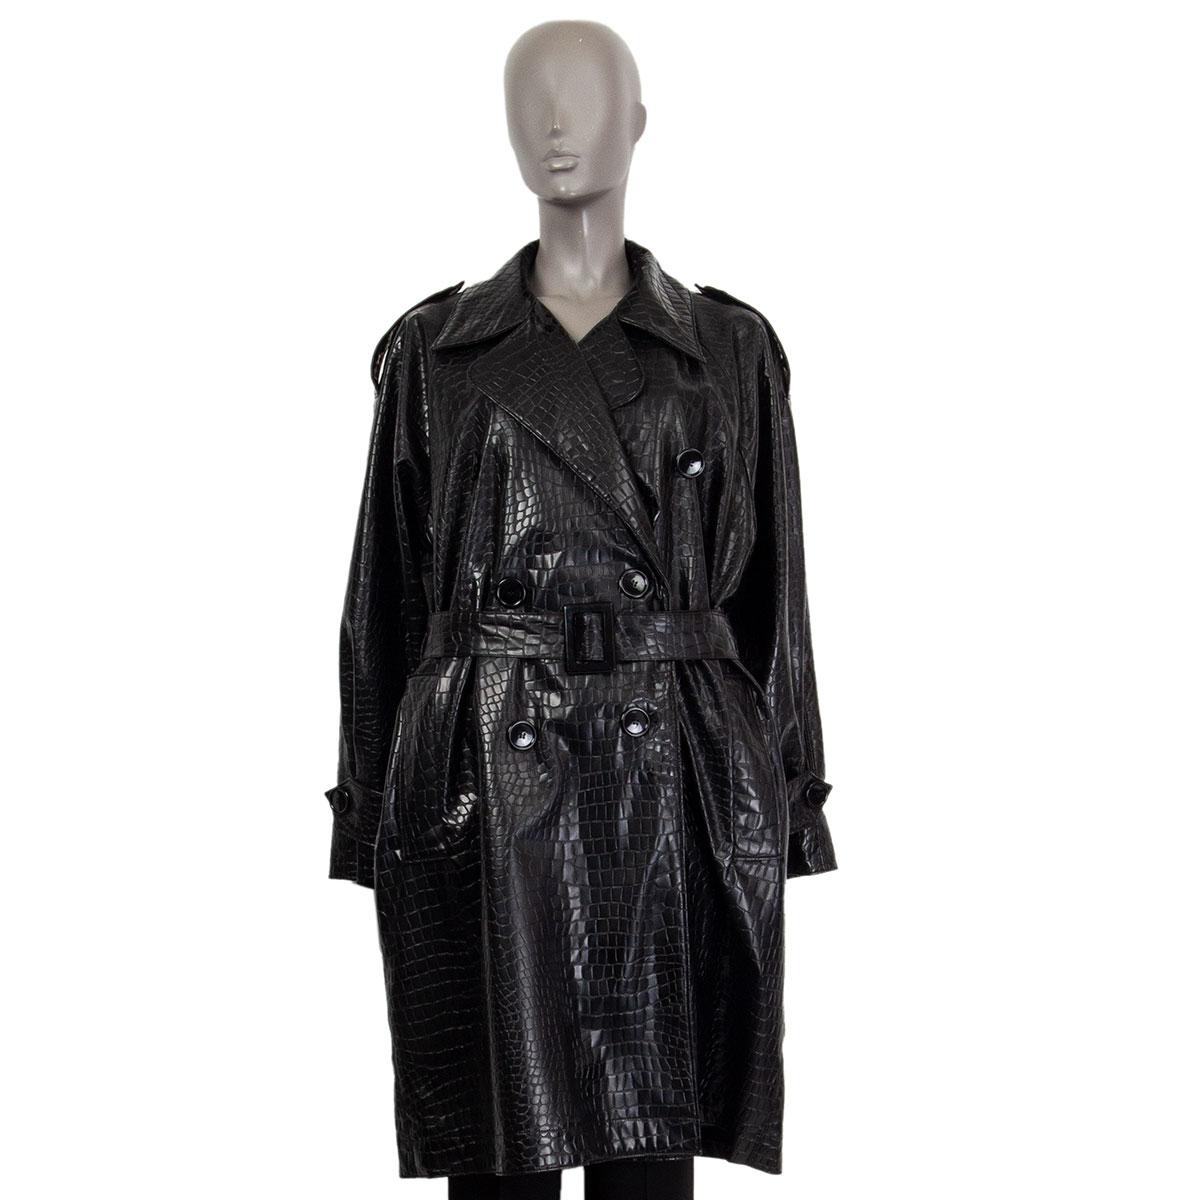 100% authentic Yves Saint Laurent double- breasted croc embossed trench coat in black PVC (100%). With notched lapel collar, waist-belt, two pocket shoulder and cuff . Lined in black material. Has been worn is in excellent condition.

Tag Size